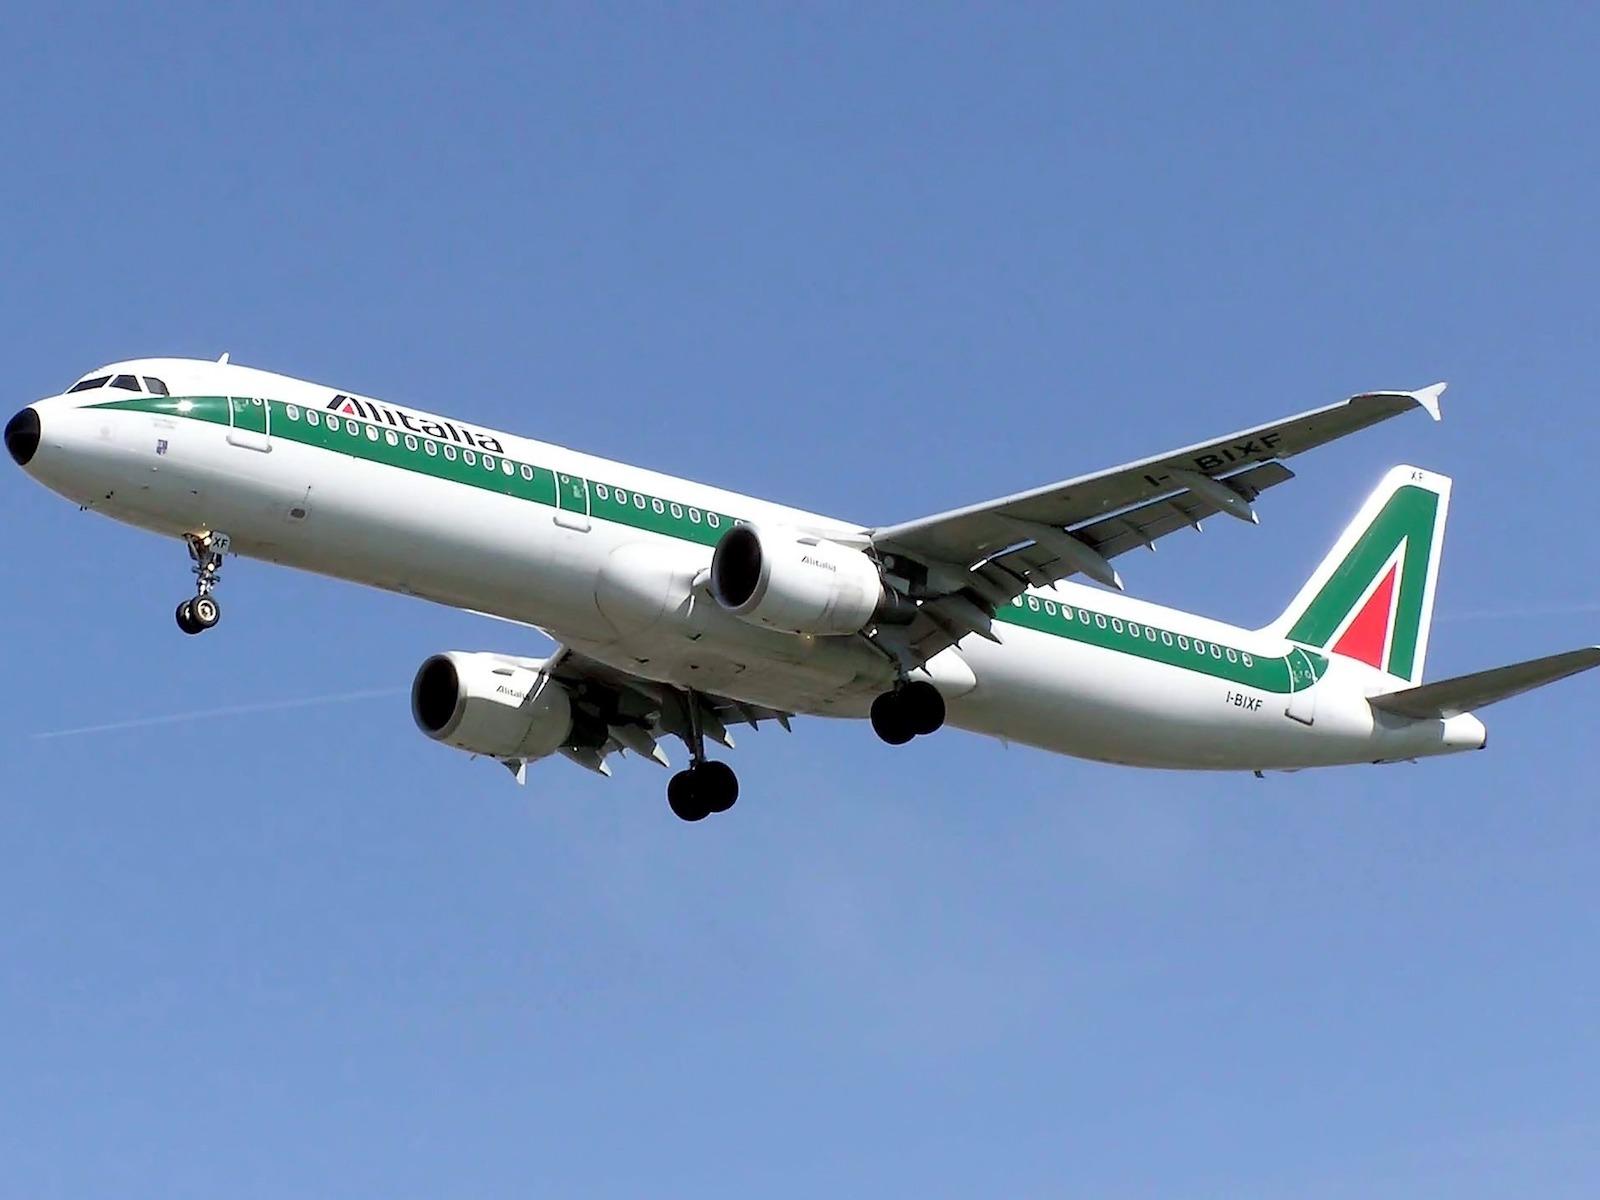 You Will Soon Be Able to Book an Alitalia Flight Once Again - Miles to Memories